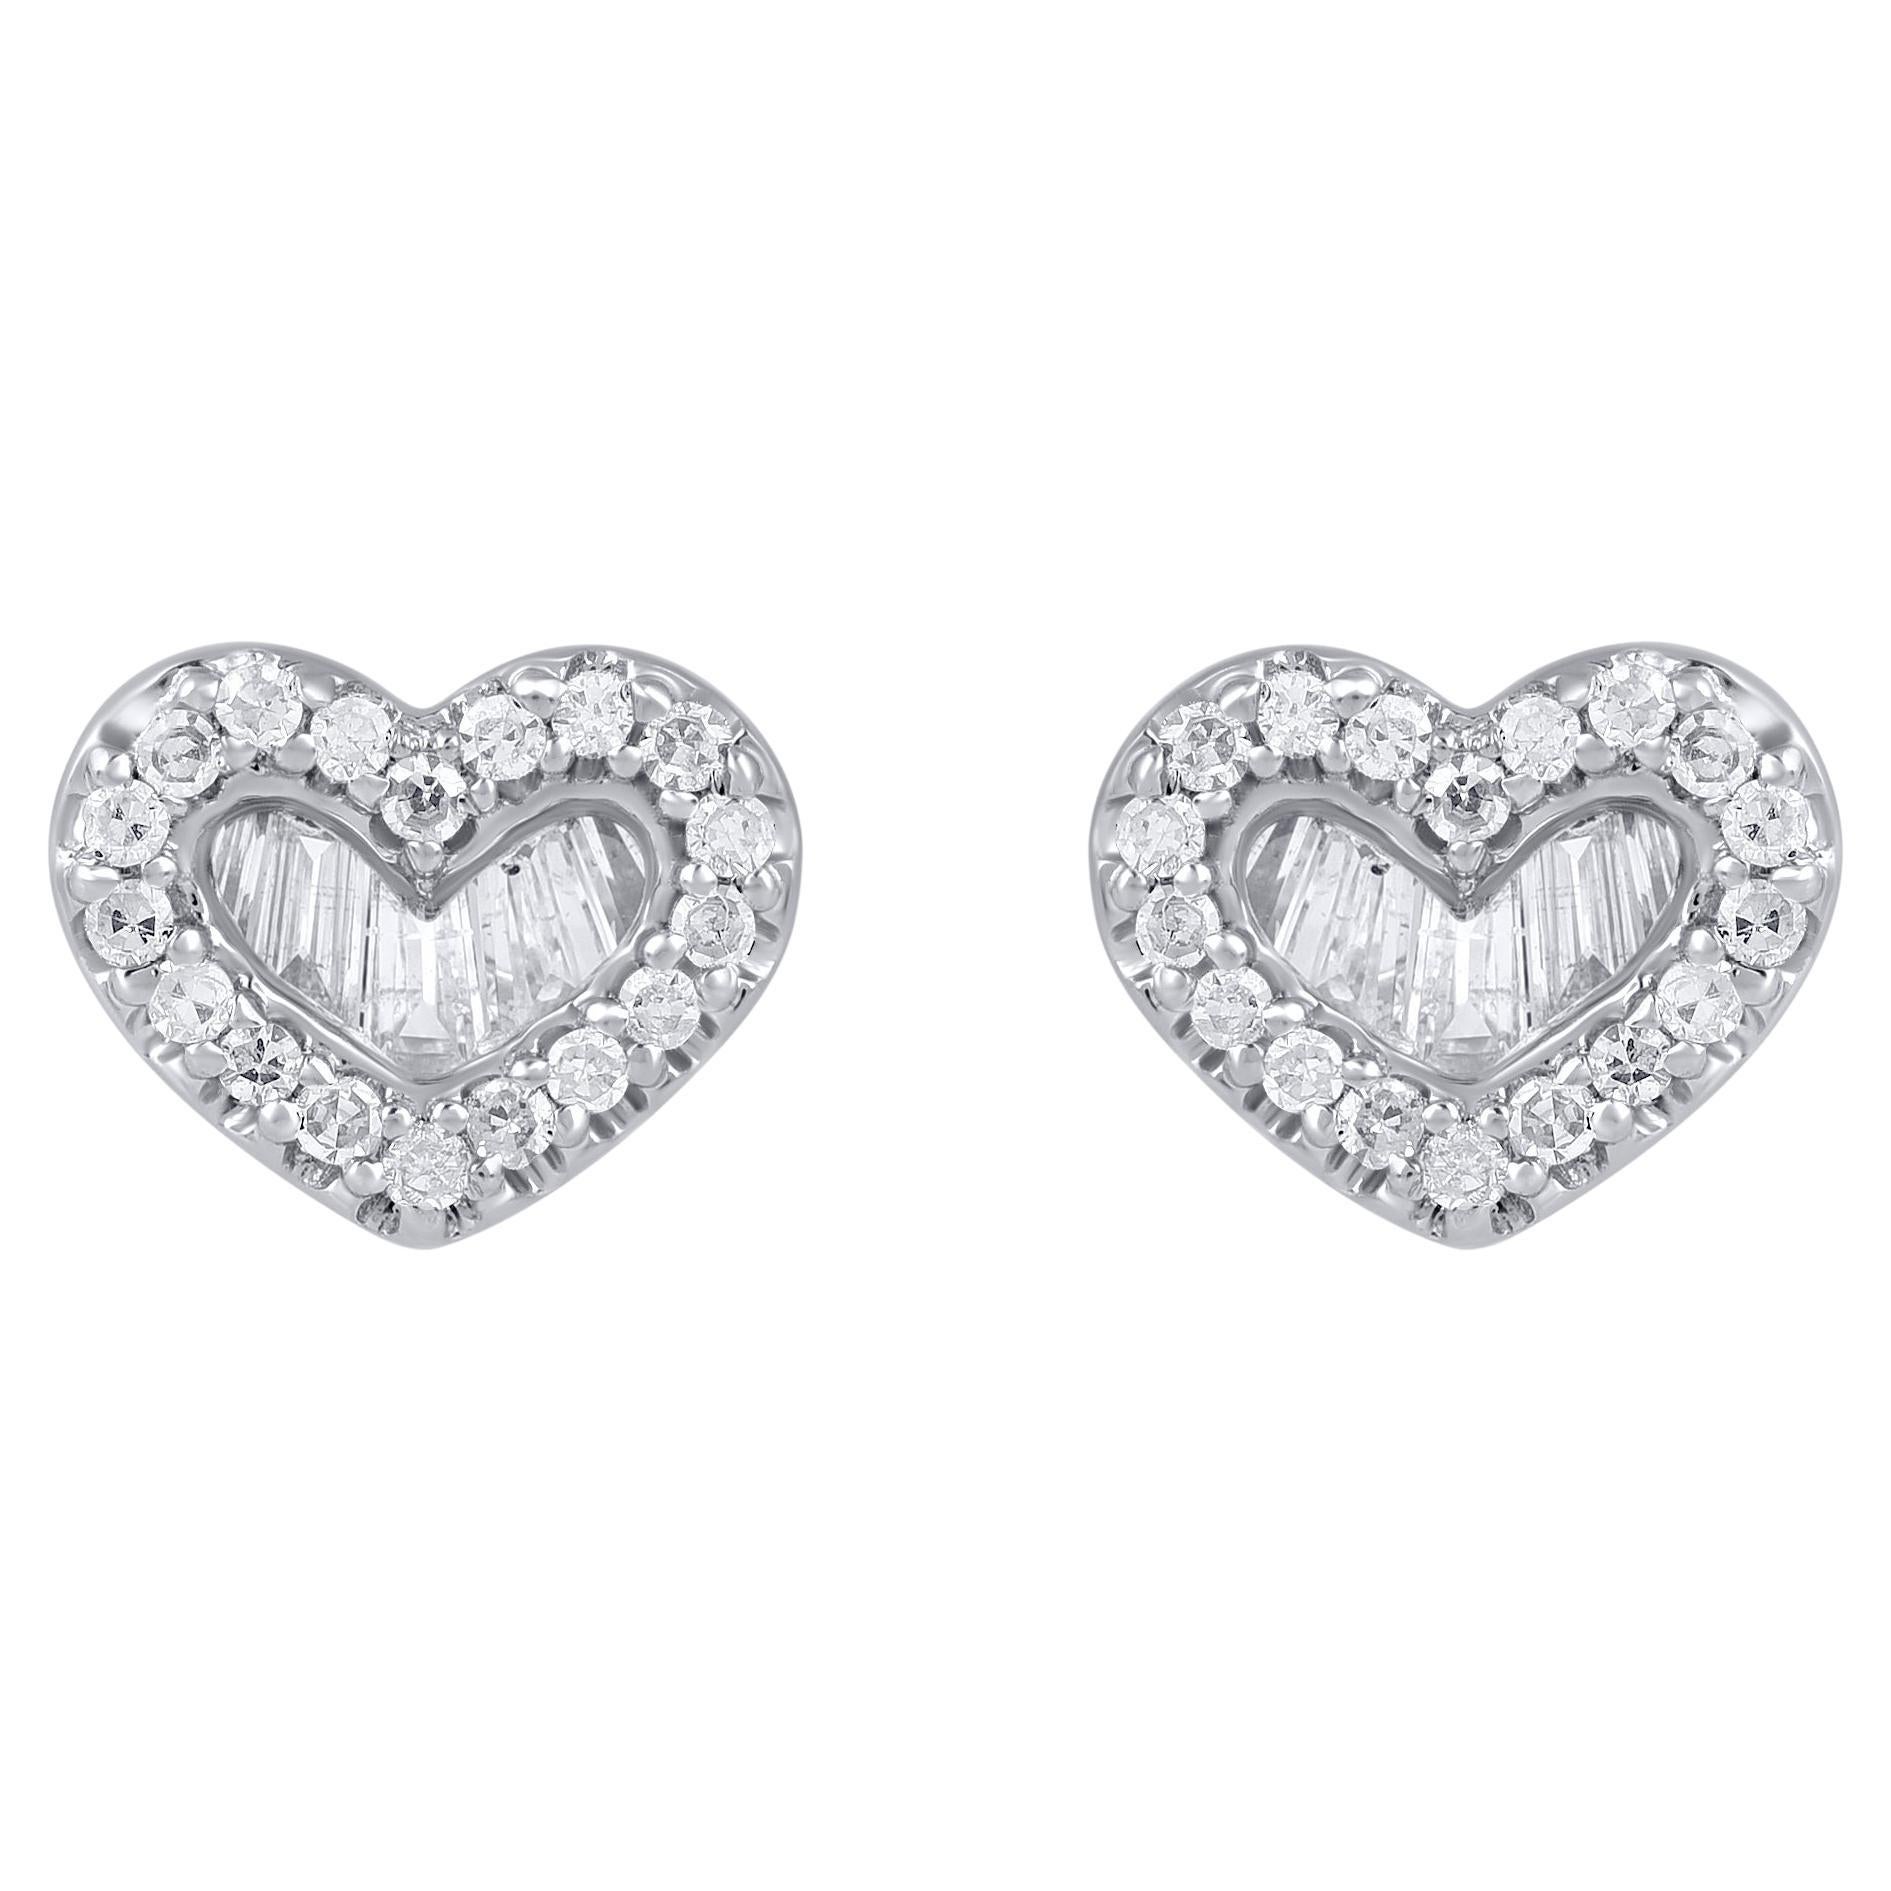 TJD 0.33 Carat Round and Baguette Diamond 14KT White Gold Heart Stud Earrings For Sale